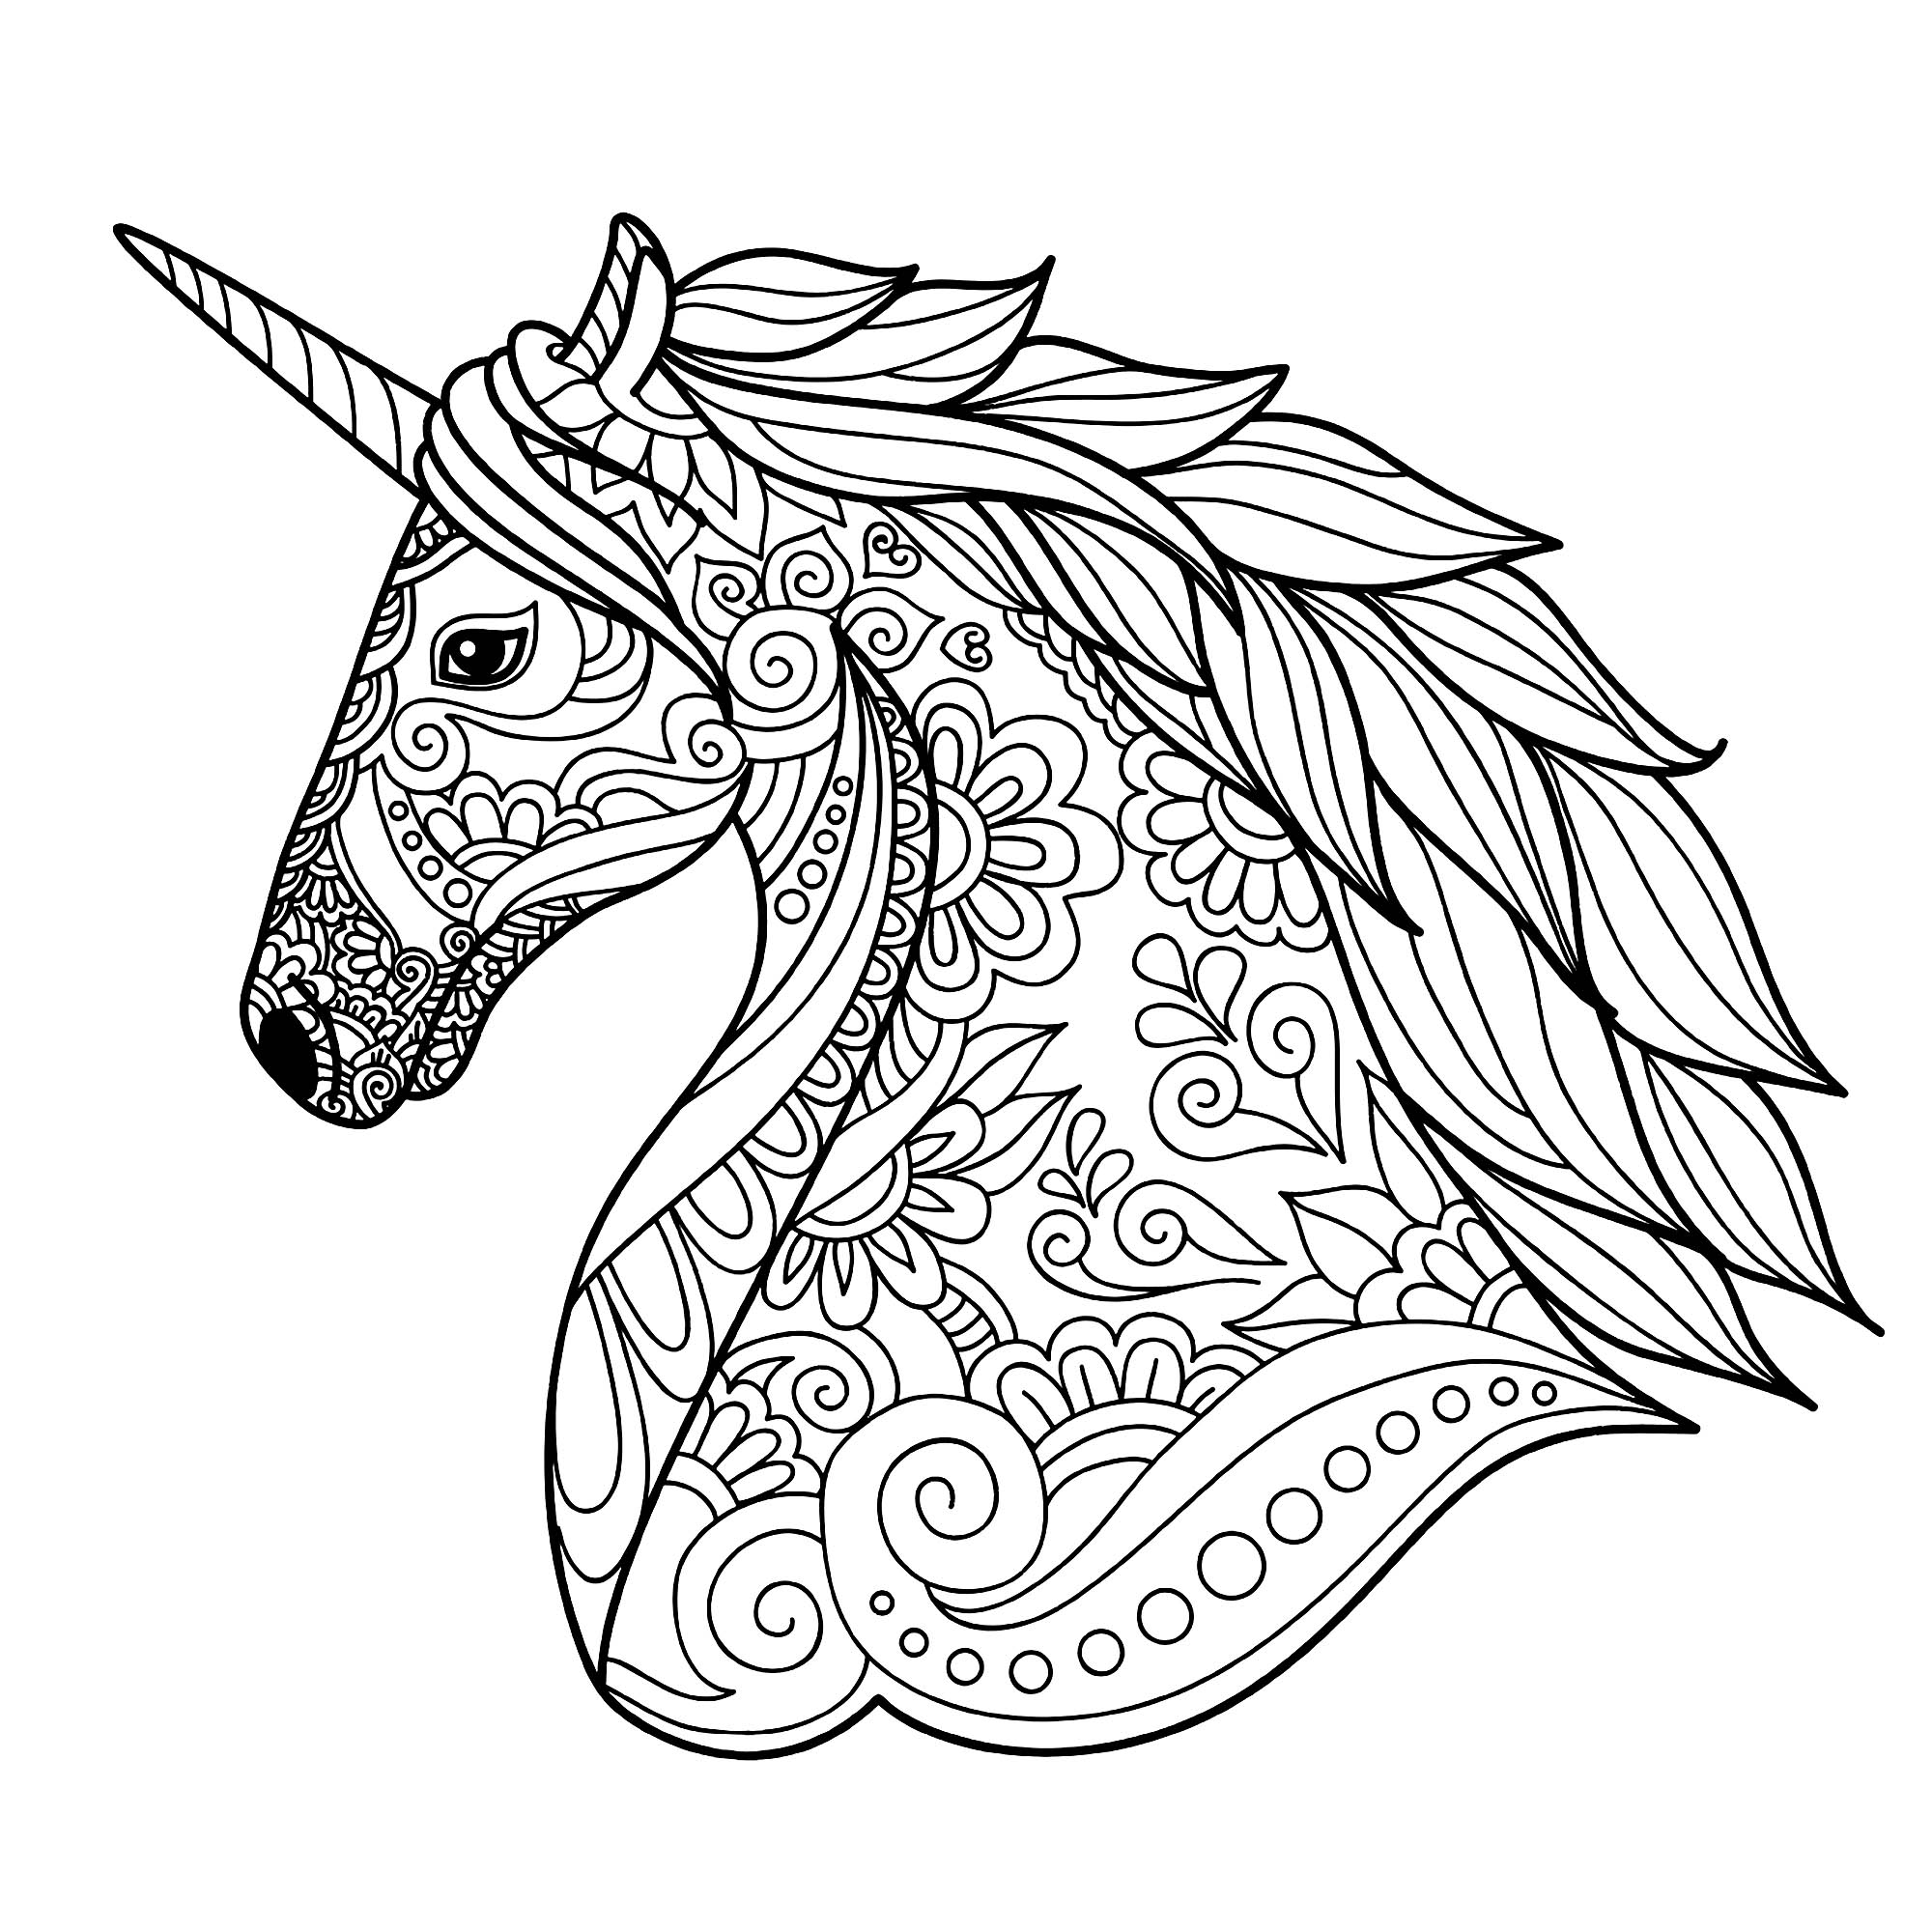 Download Unicorn head simple - Unicorns Adult Coloring Pages